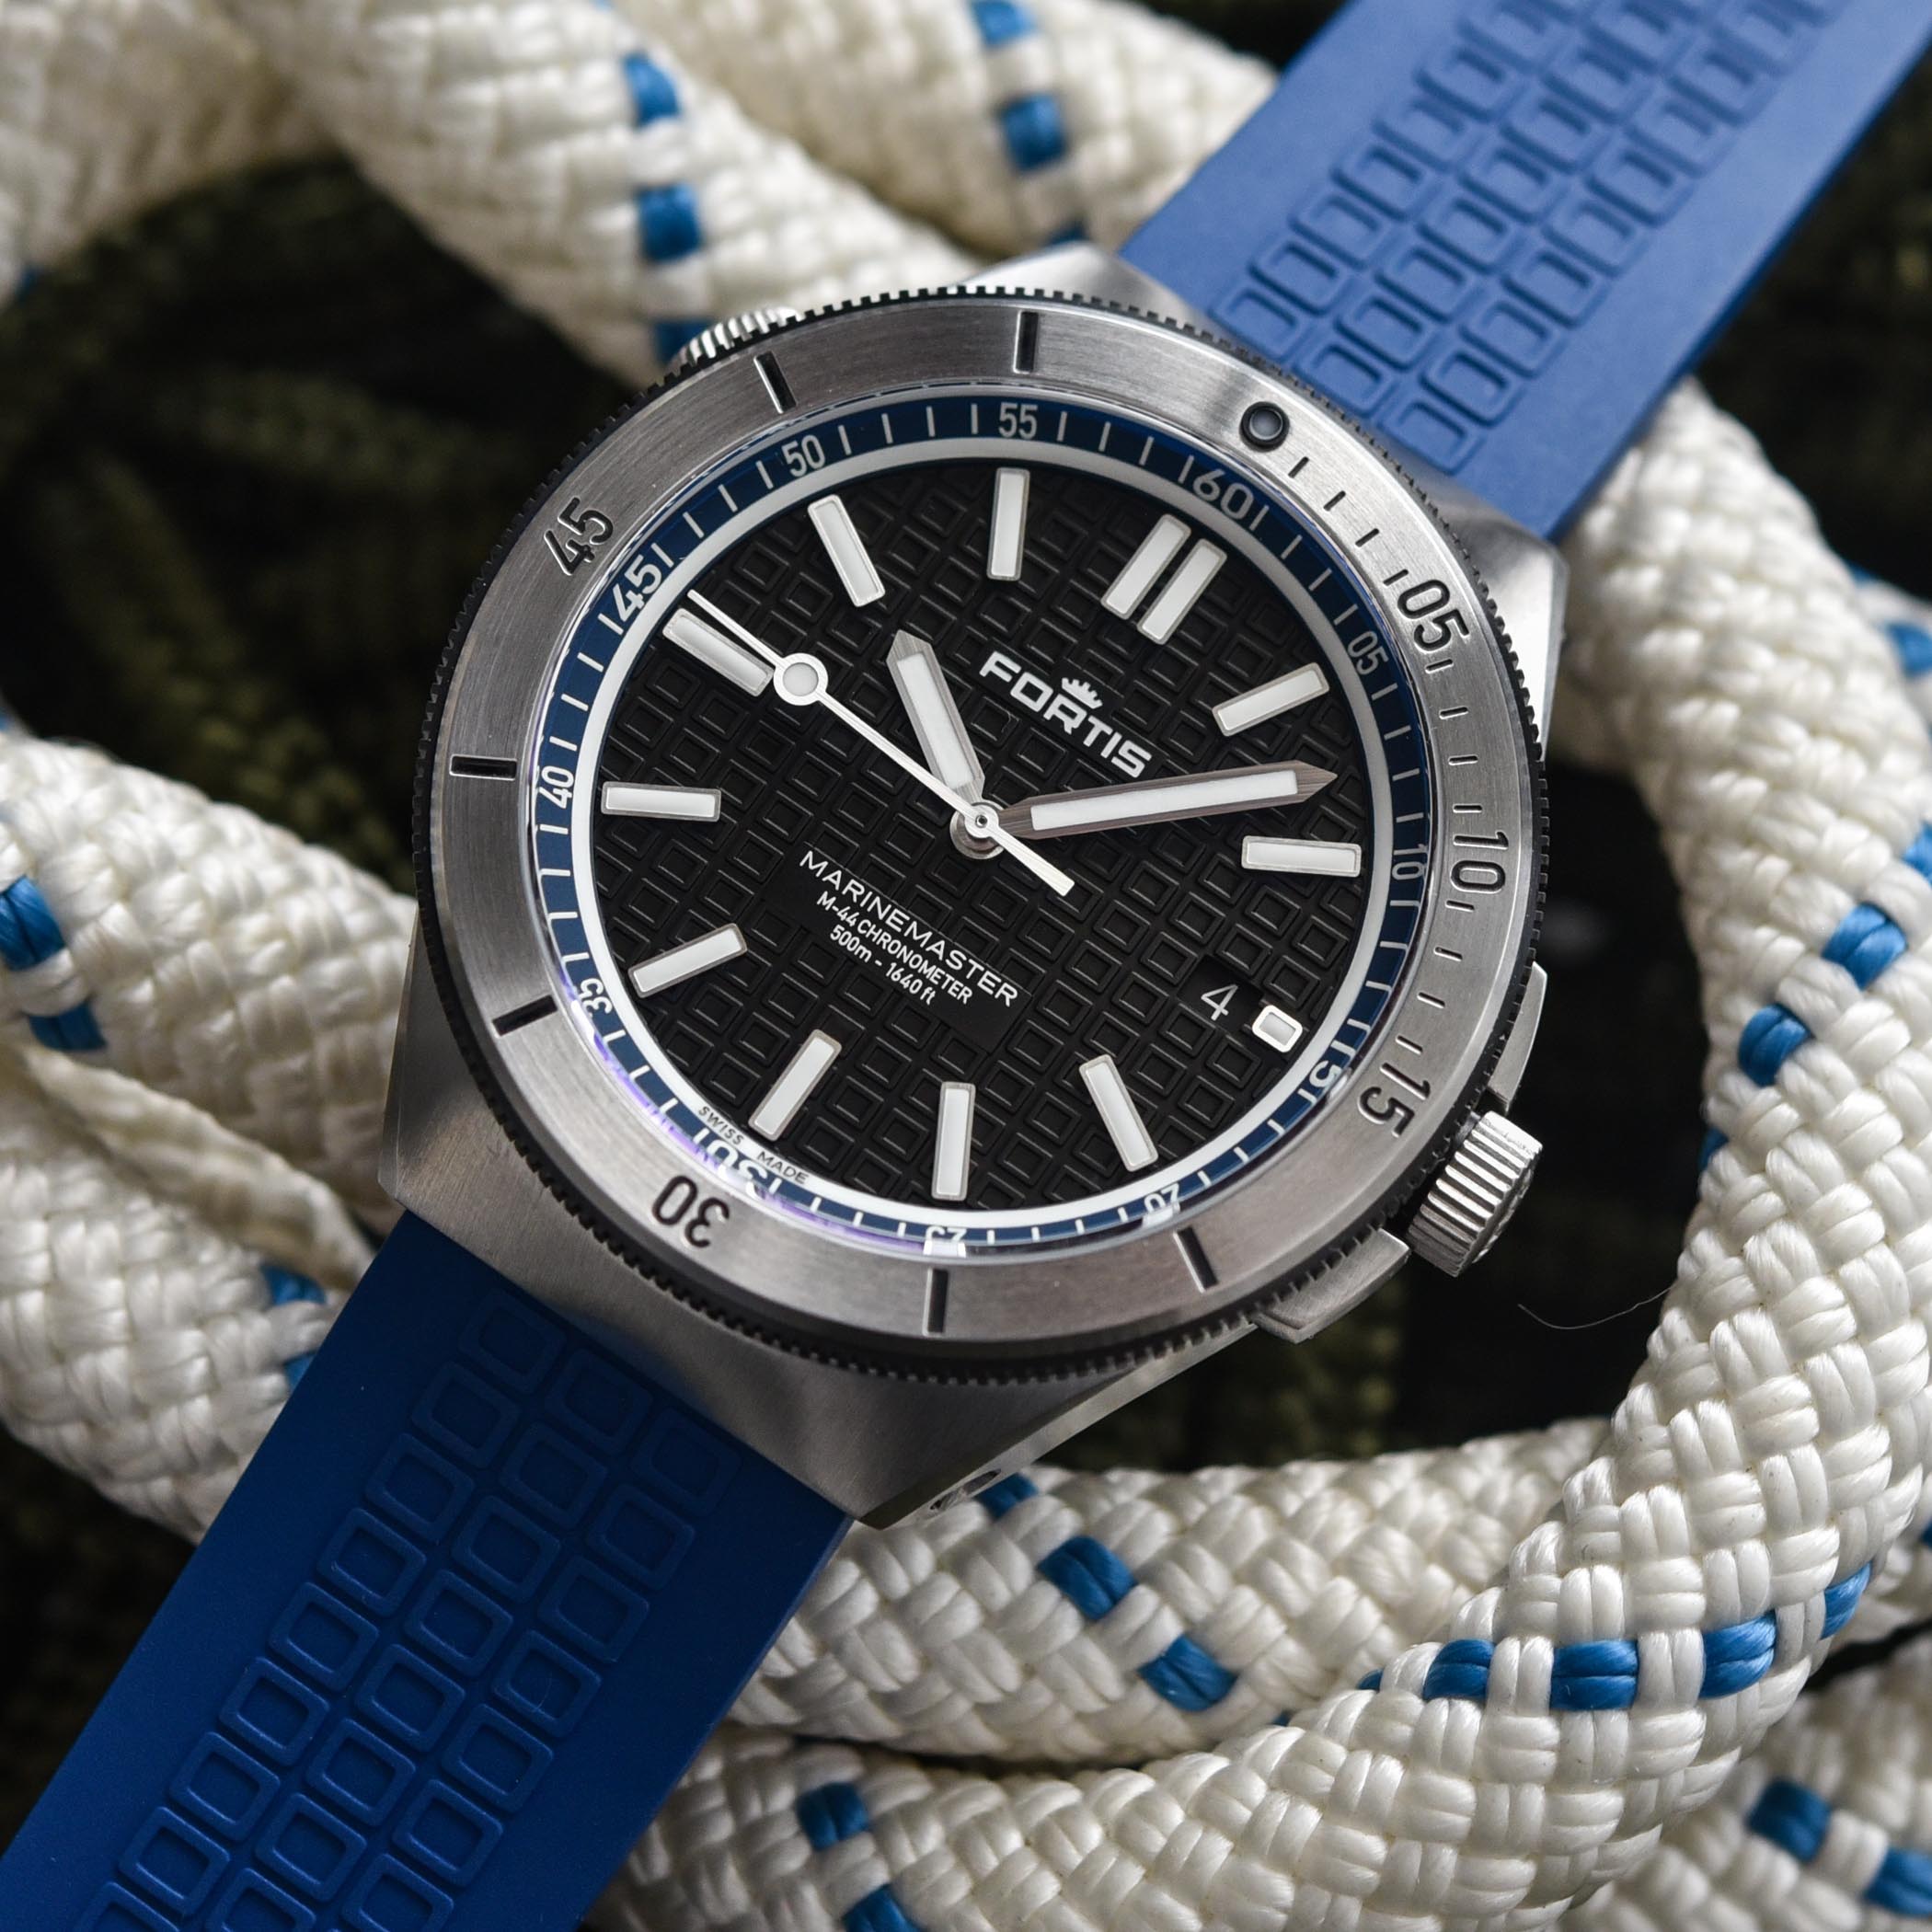 2022 Fortis Marinemaster M-44 New Colours Green Blue Black Hands-on